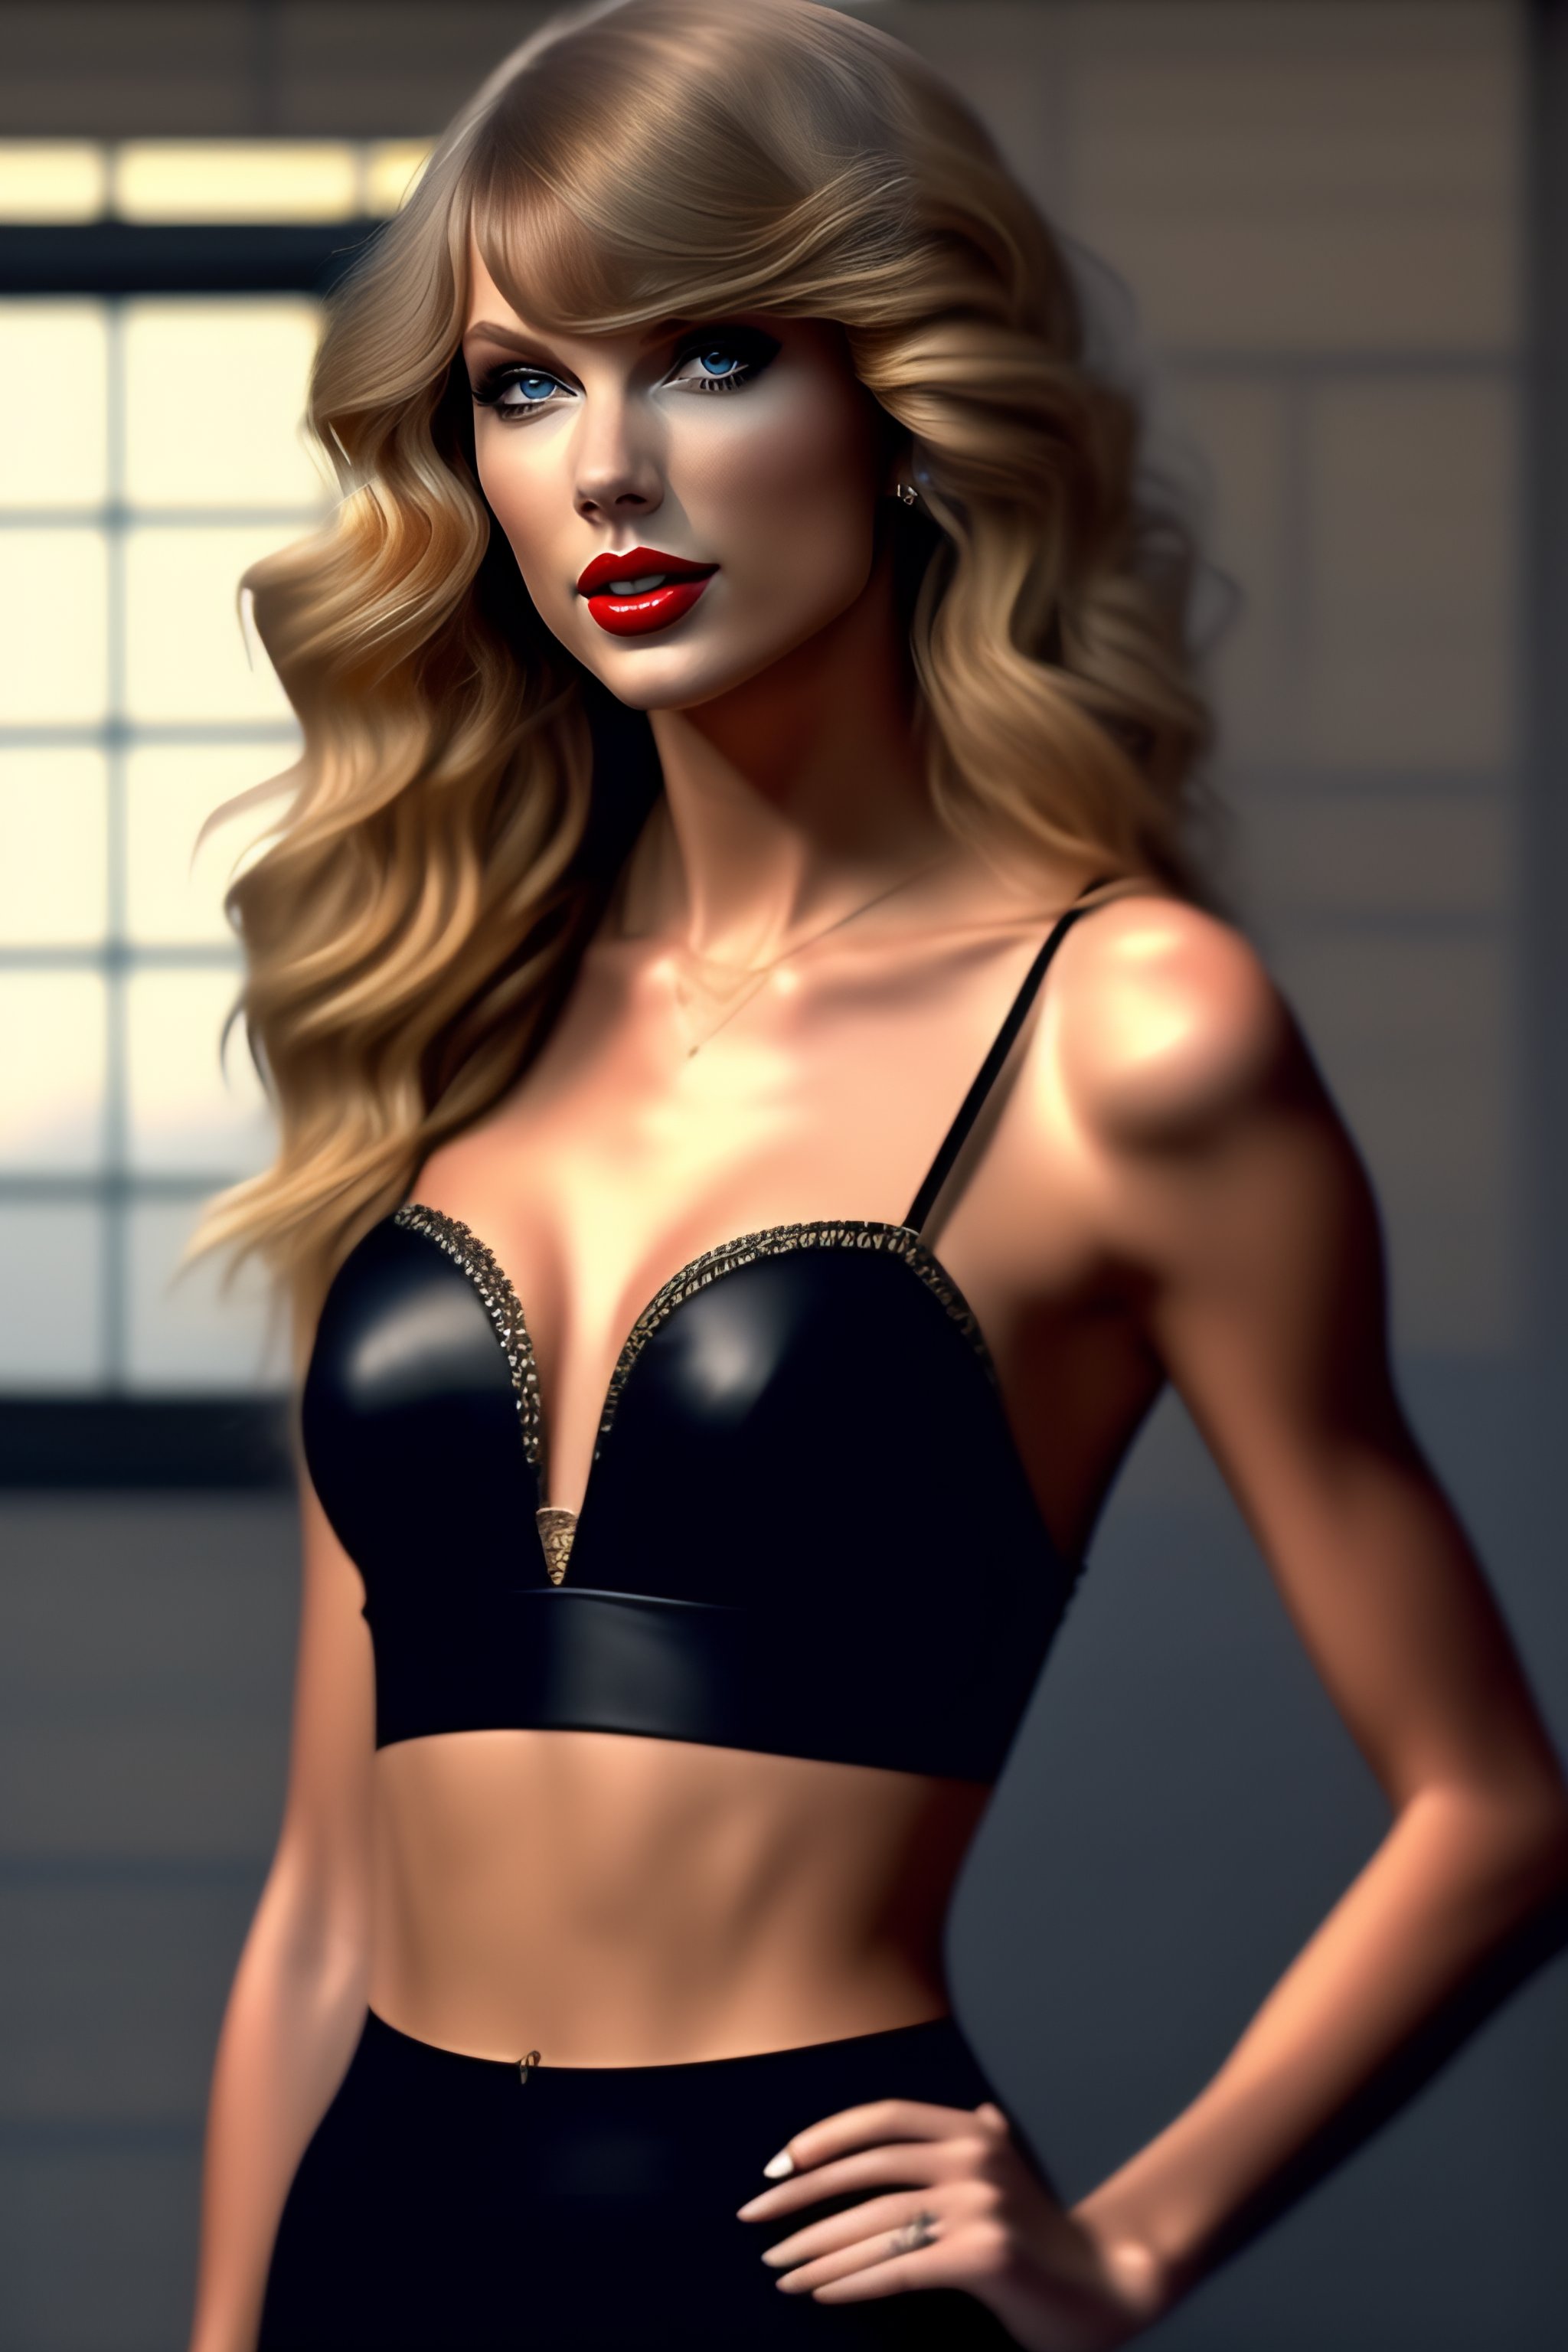 Lexica - Taylor swift, full body view, wearing in black bra, very detailed  4k quality super realistic